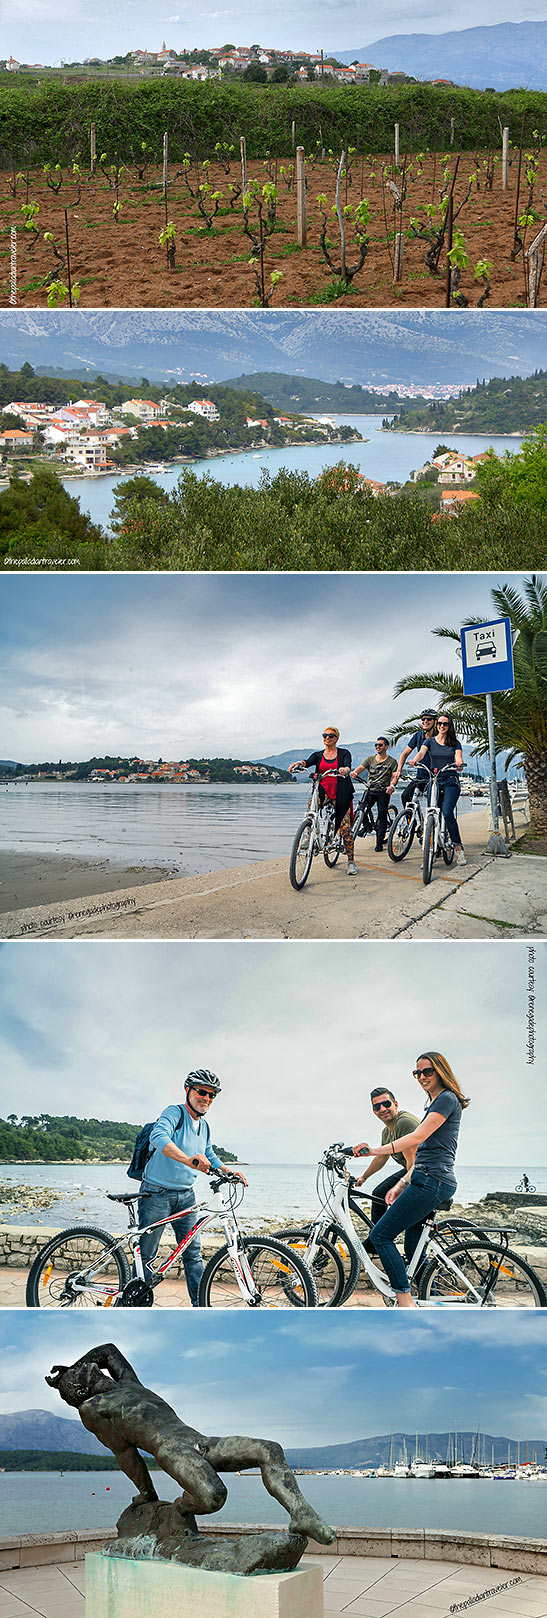 a bike tour around Korcula takes visitors through vineyards, sandy beaches tucked inside little coves and several seaside villages